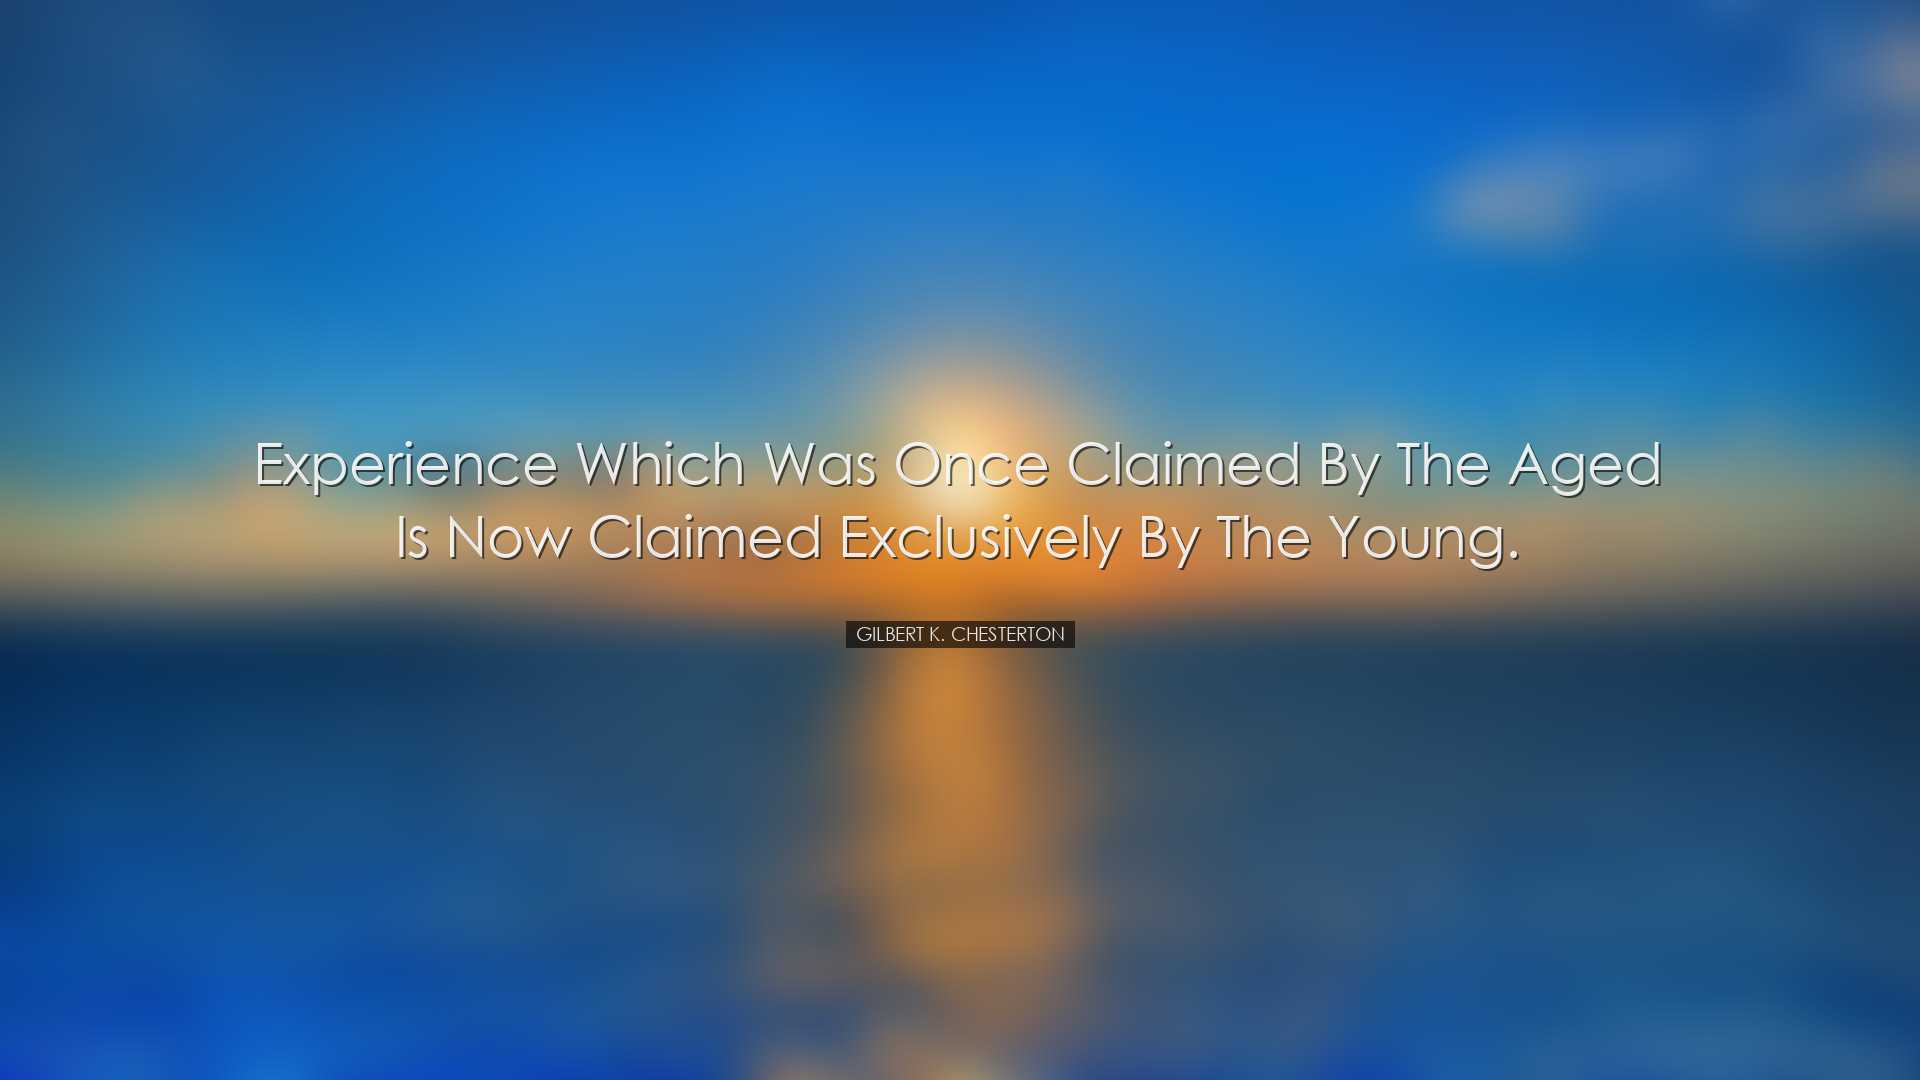 Experience which was once claimed by the aged is now claimed exclu